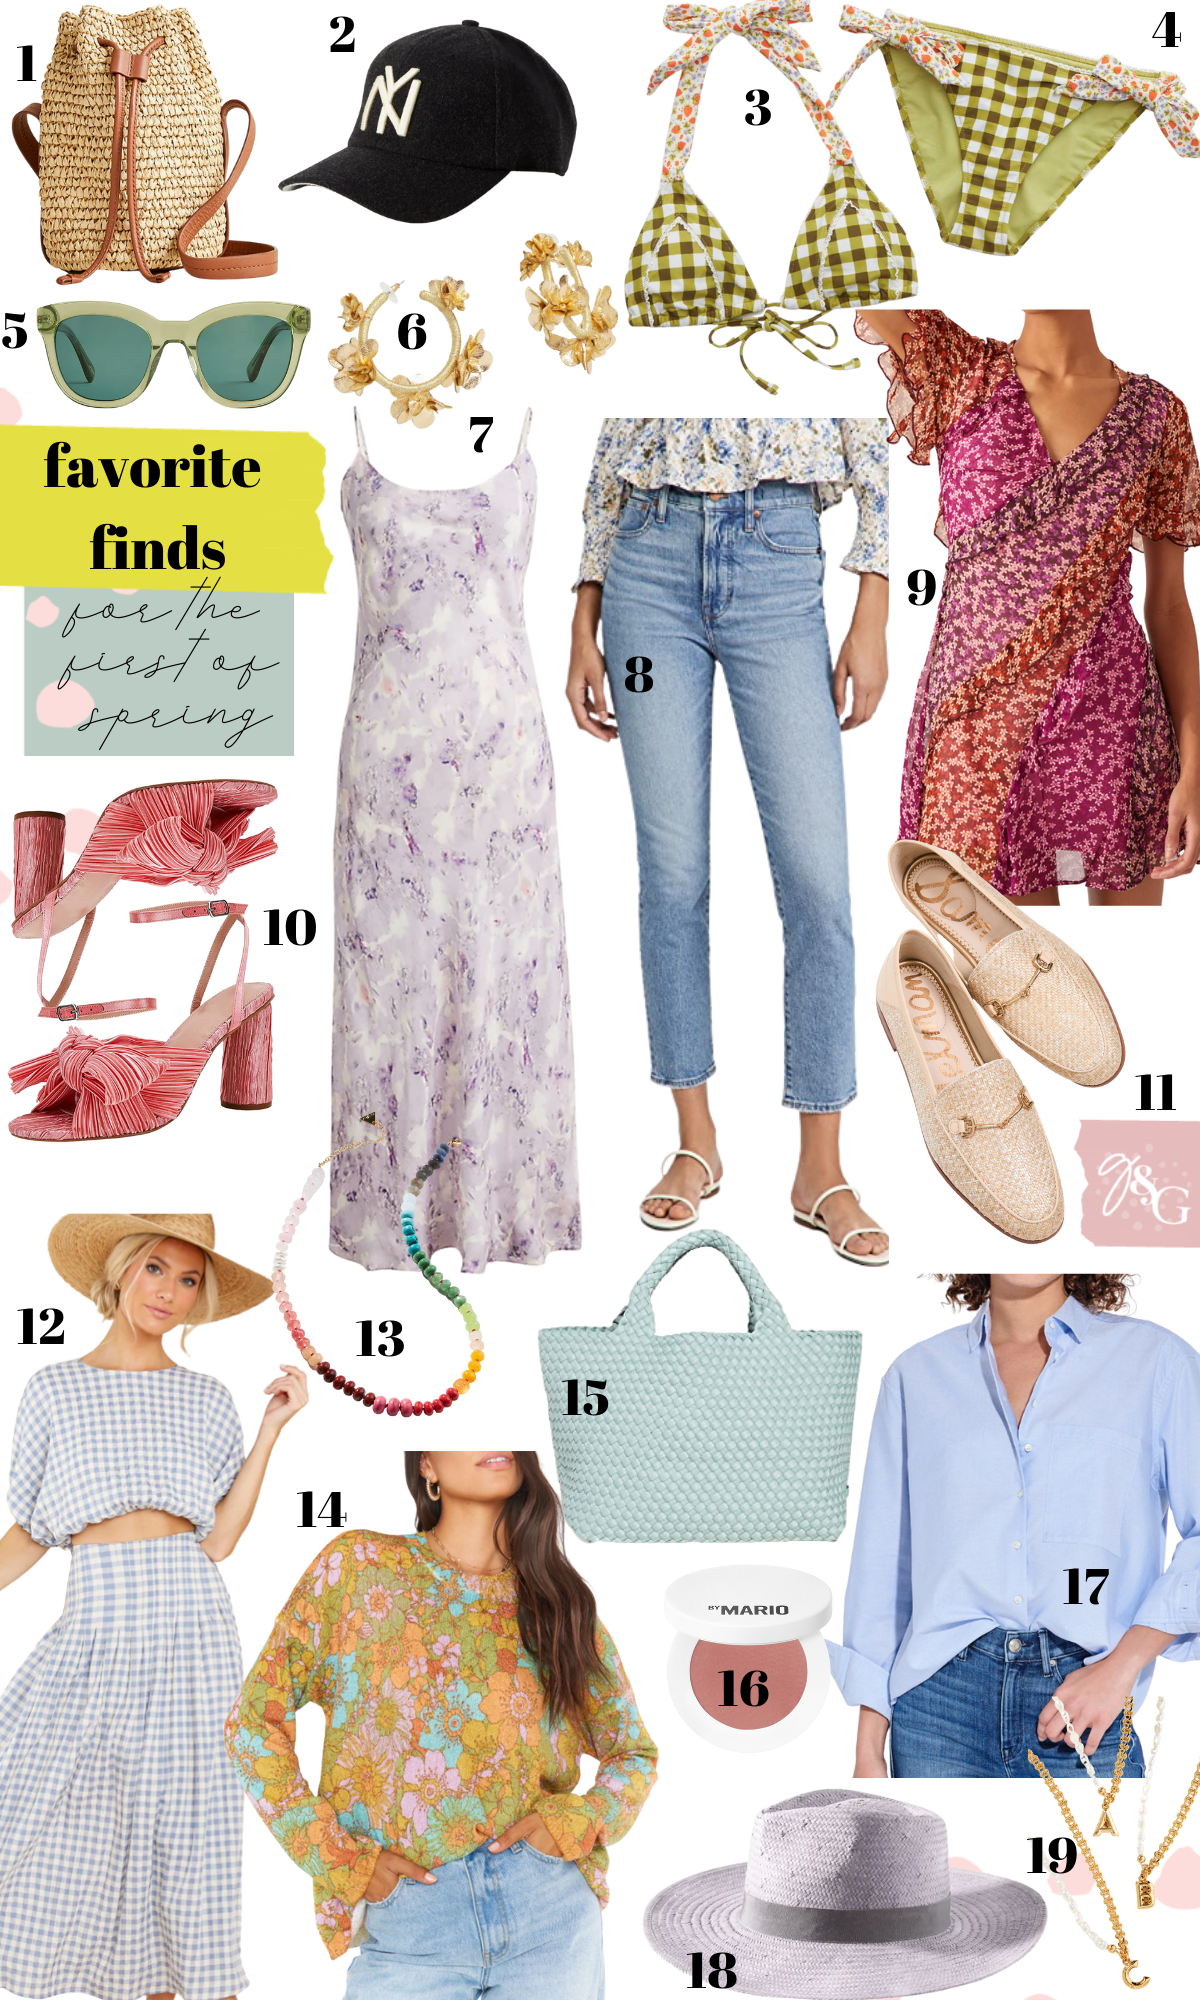 Favorite Finds for the First of Spring 